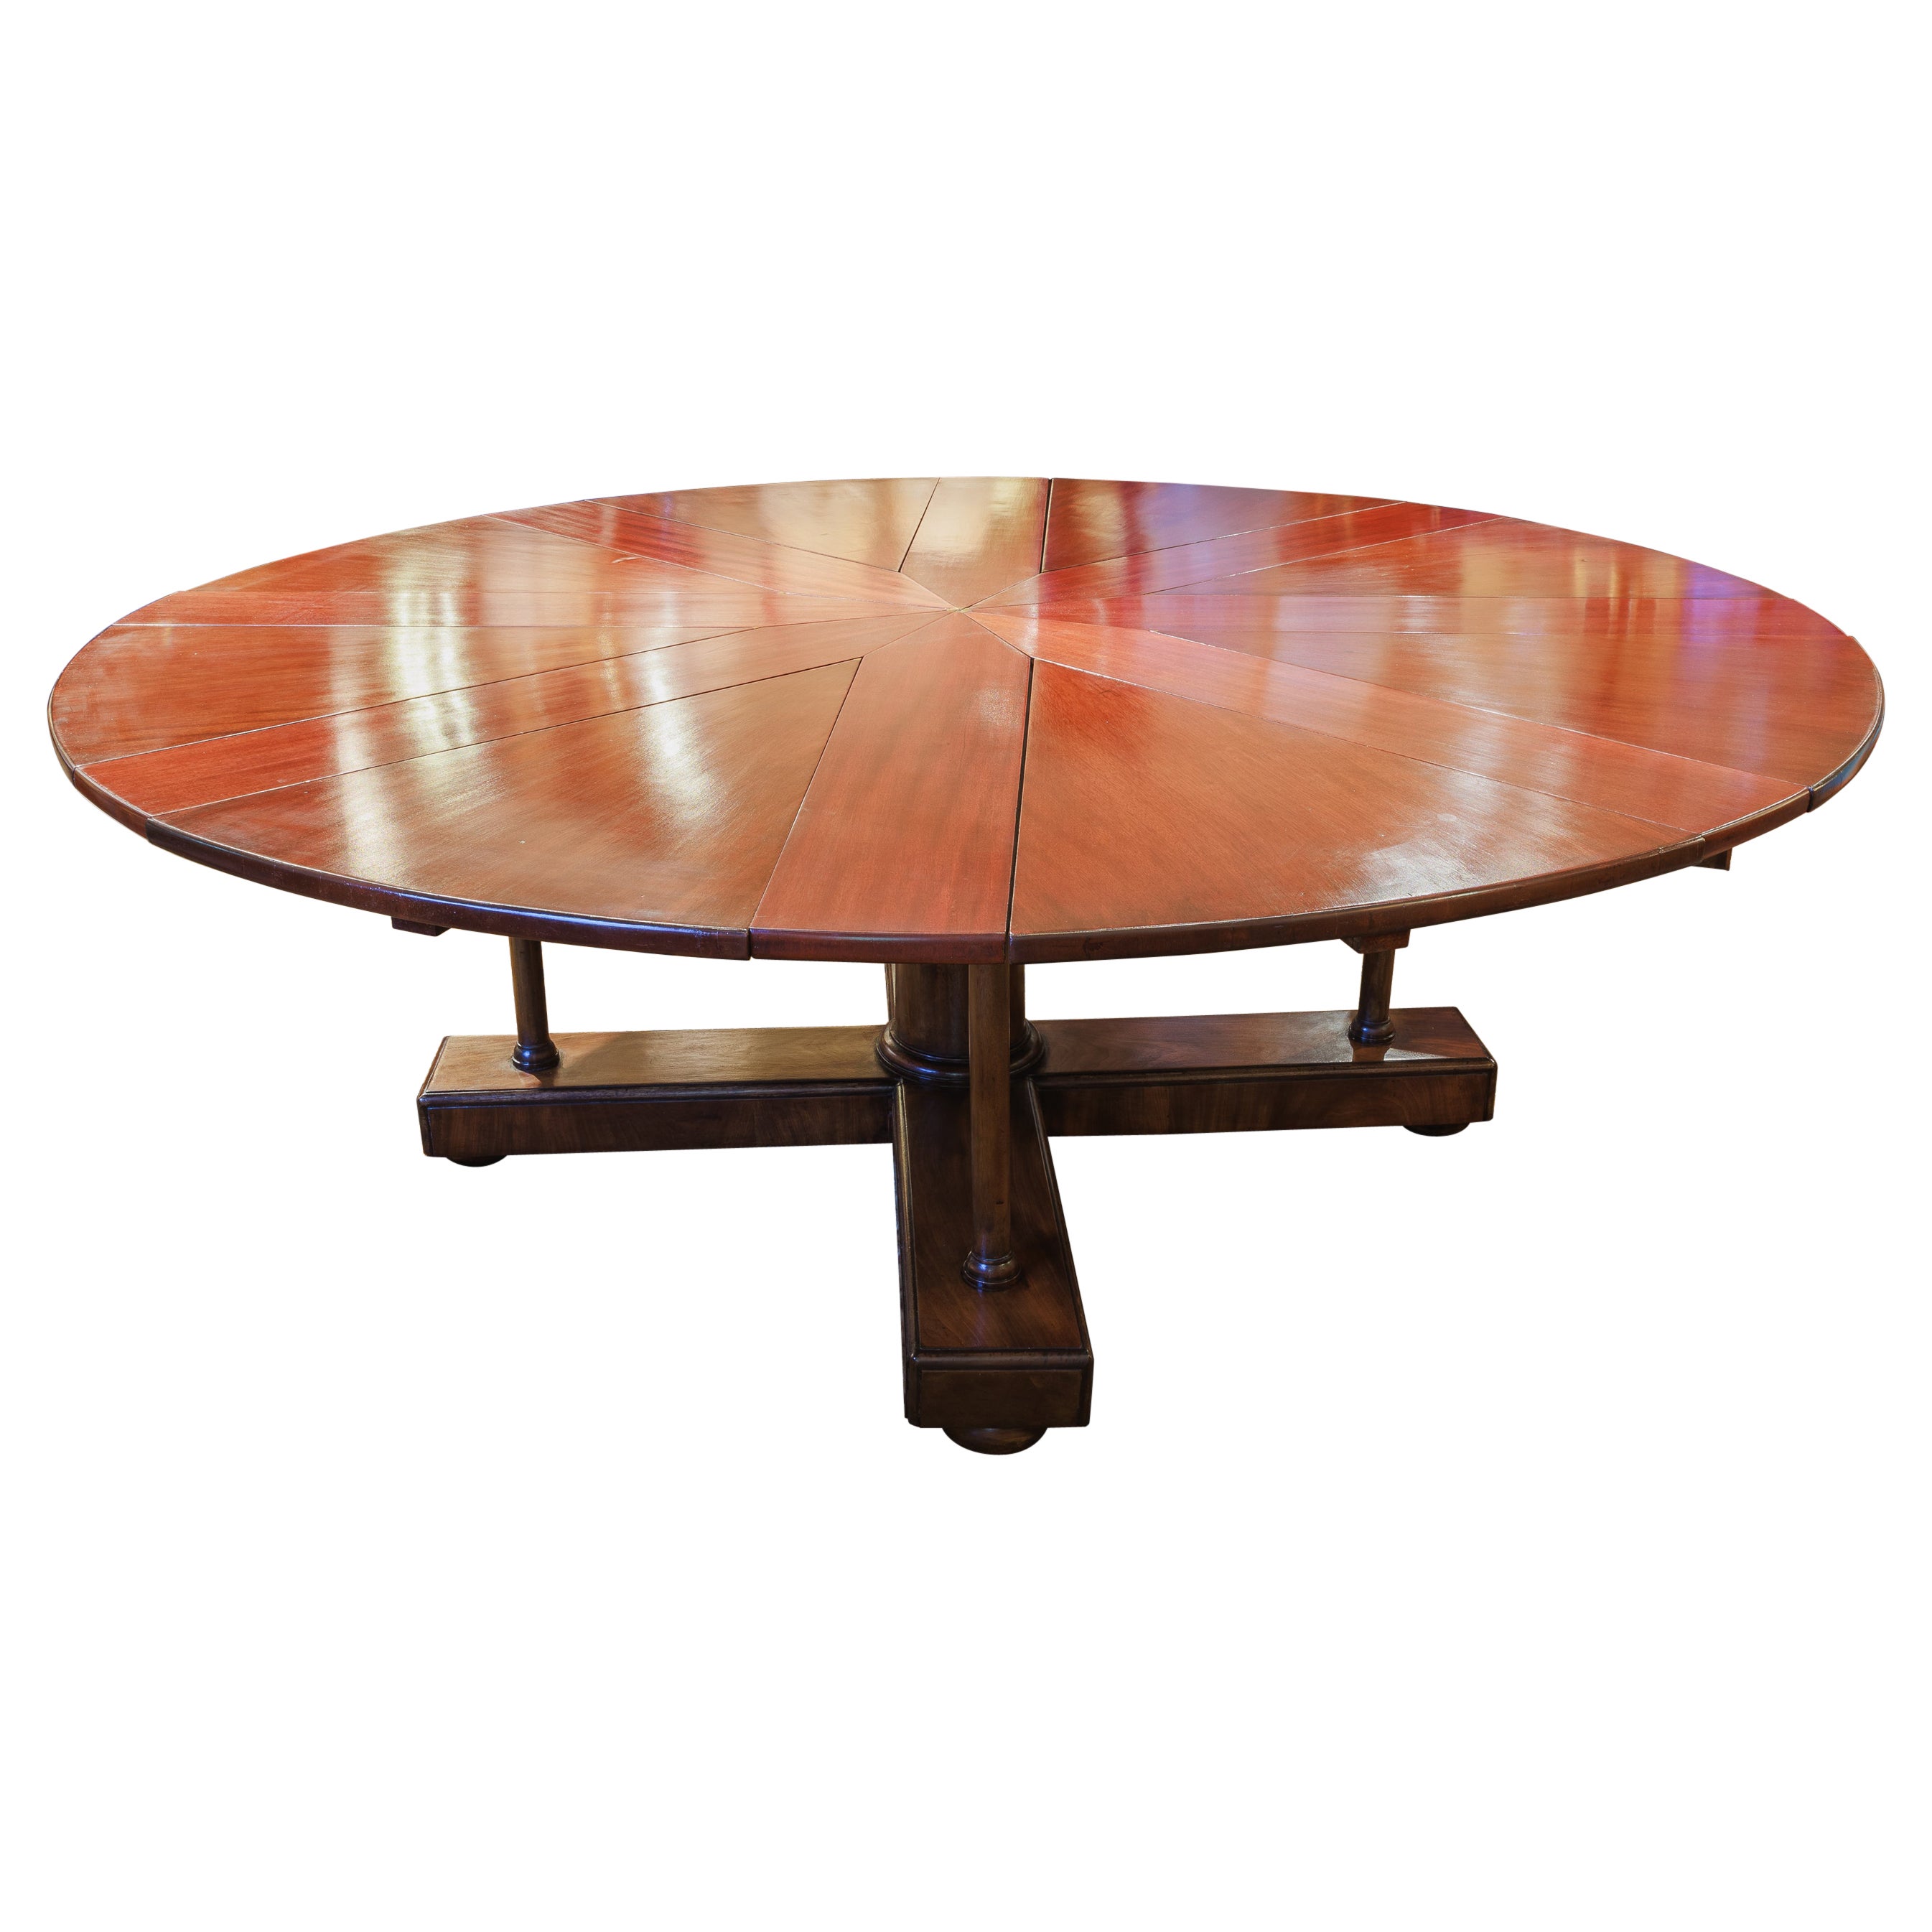 A rare 19thc early Victorian mahogany  "Jupe" circular extending dining table